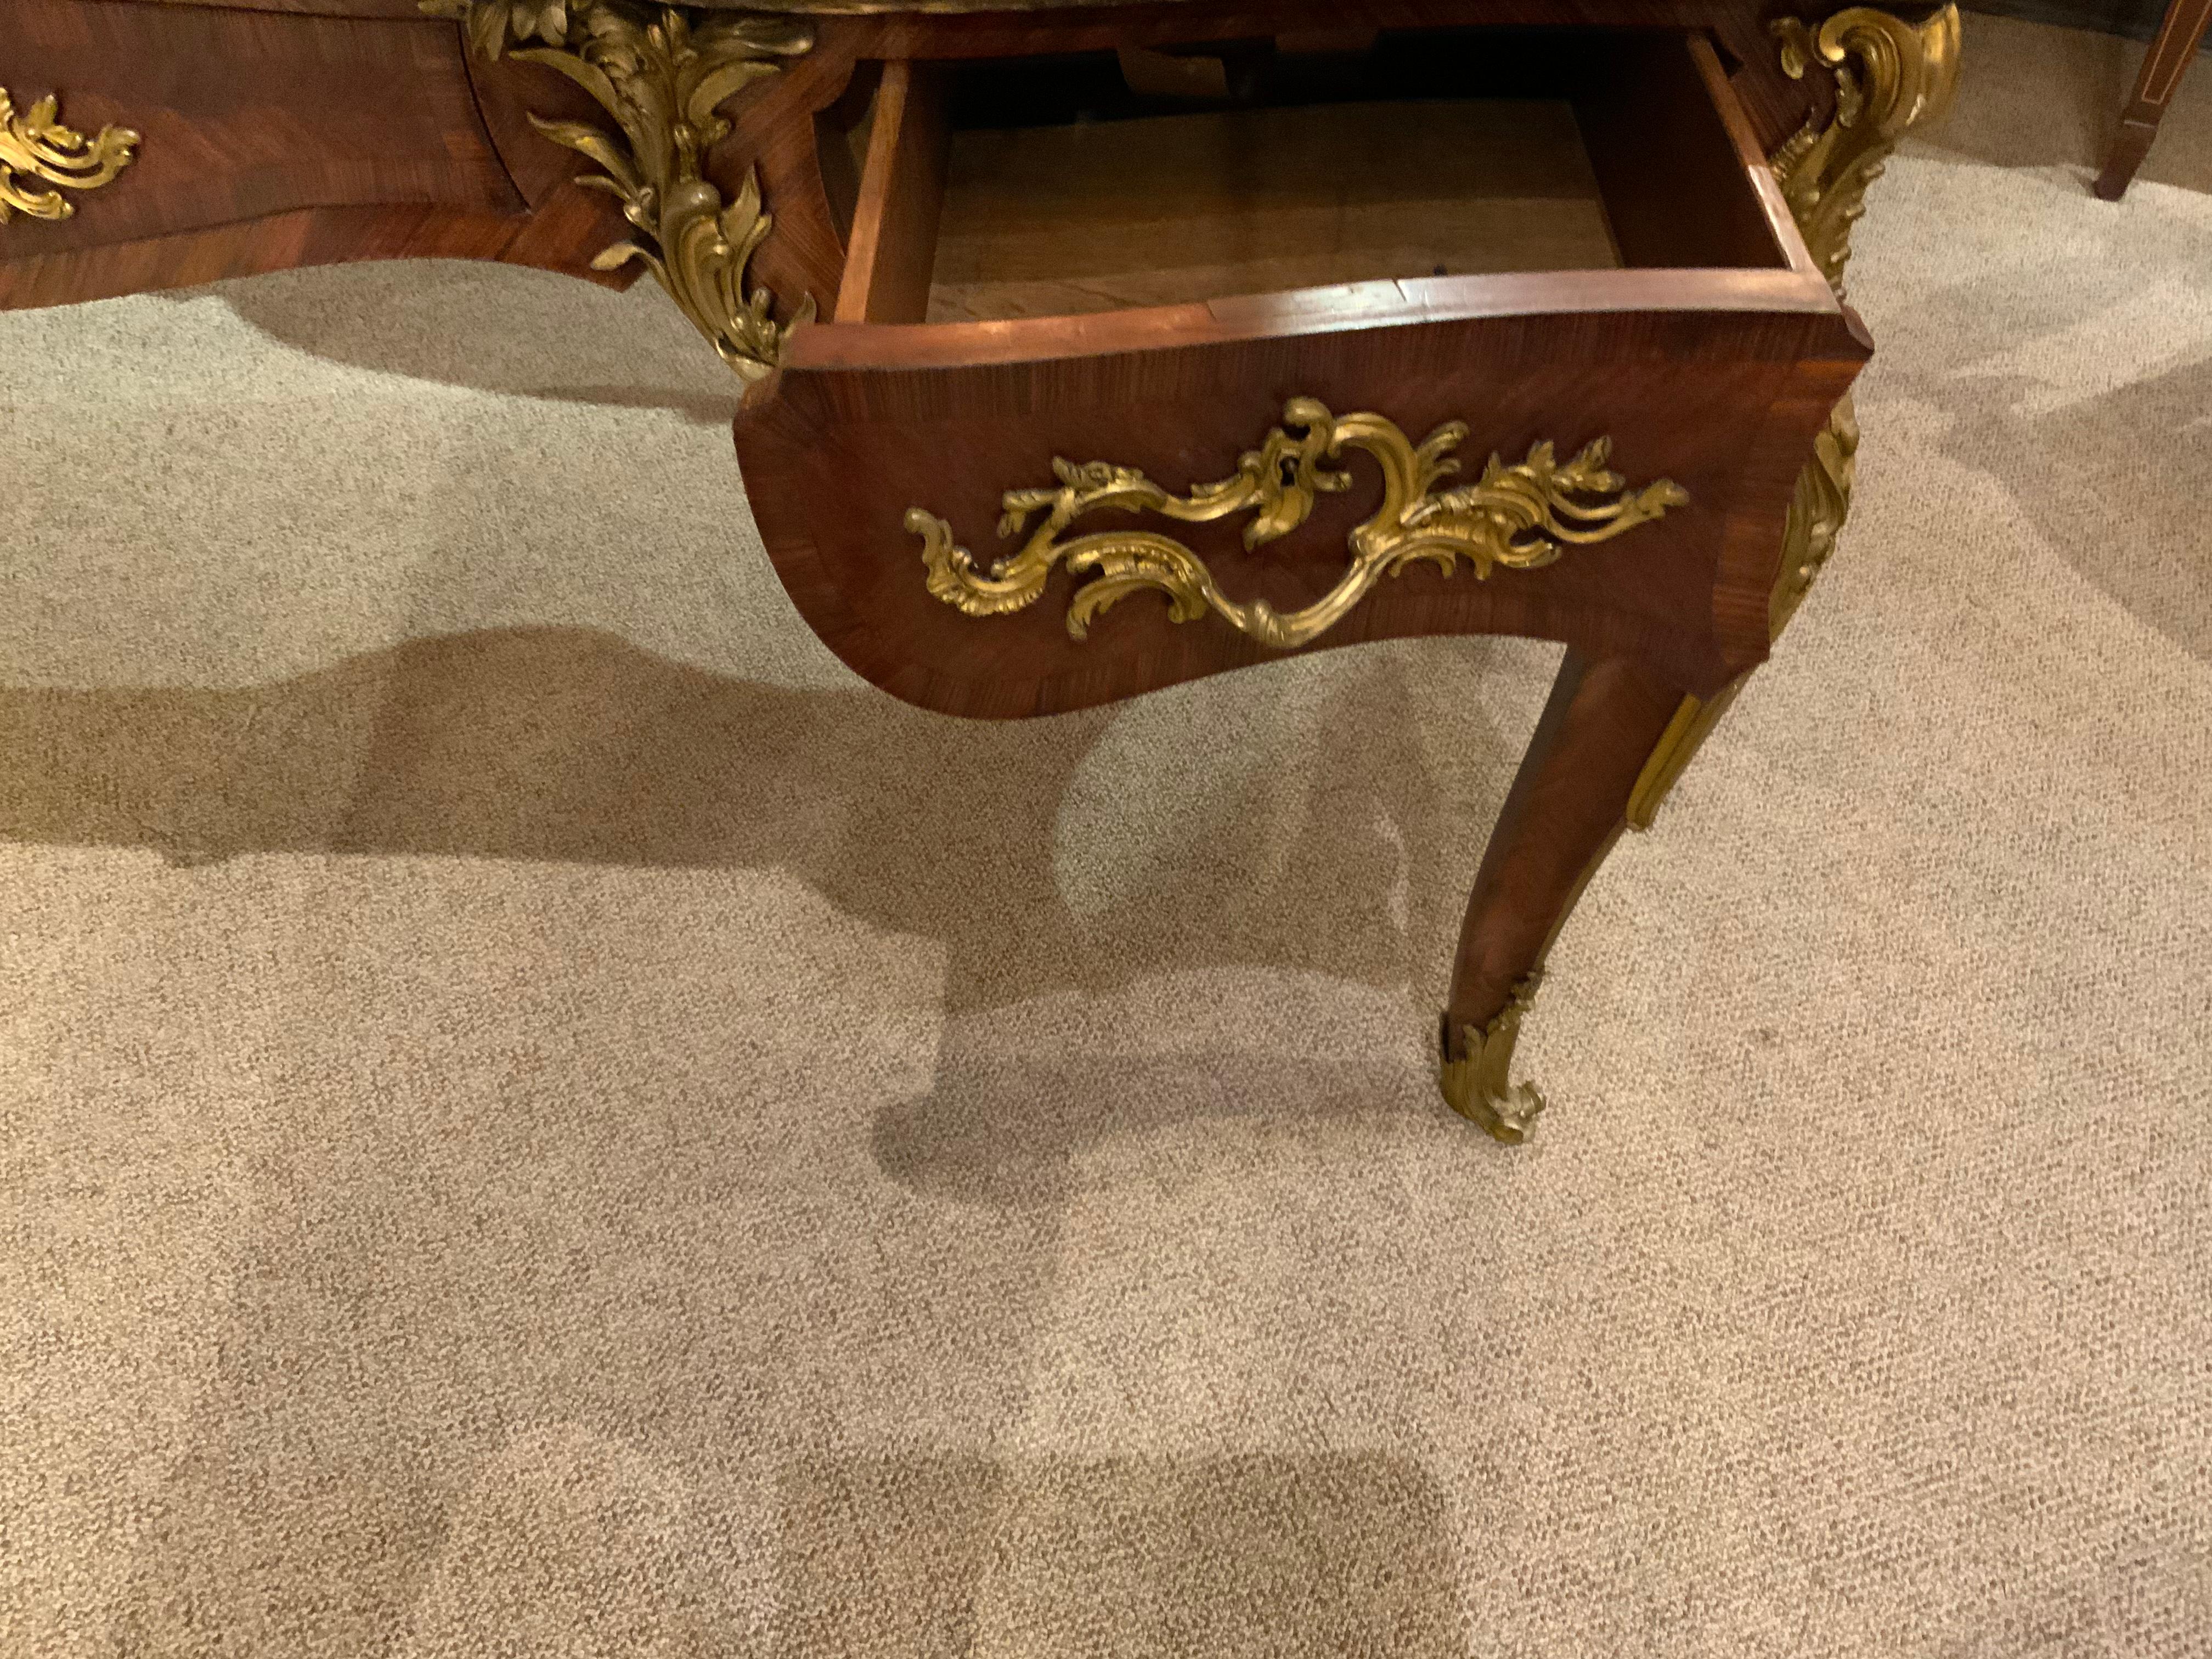 French Kingwood Bureau Plat, 19th Century, Regence-Style with Leather Top 6